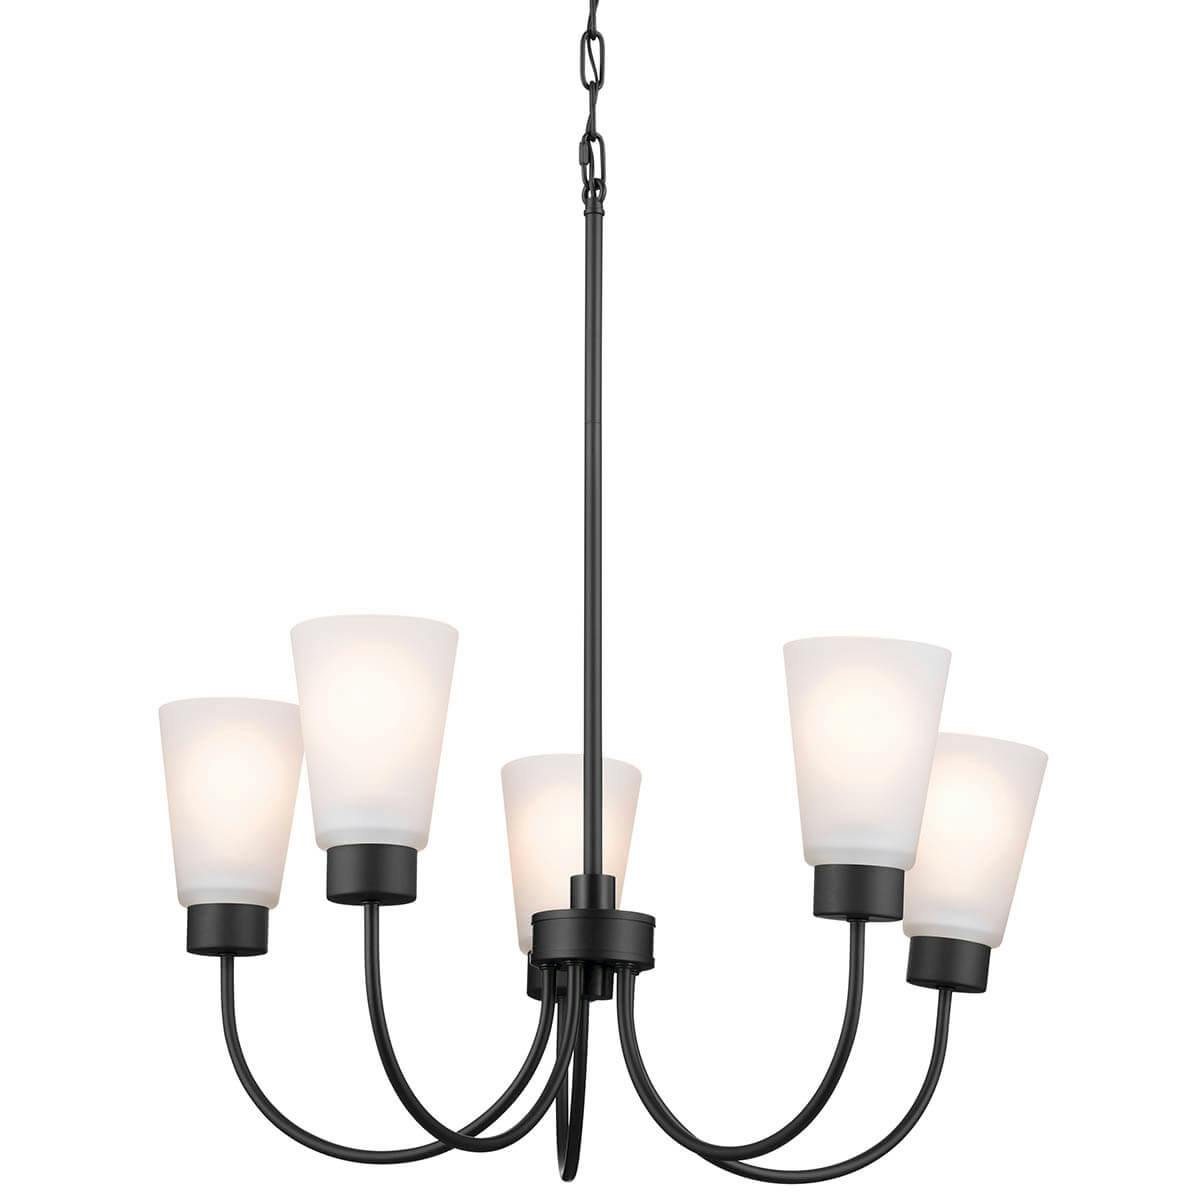 Erma 24" 5 Light Chandelier Black without the canopy on a white background